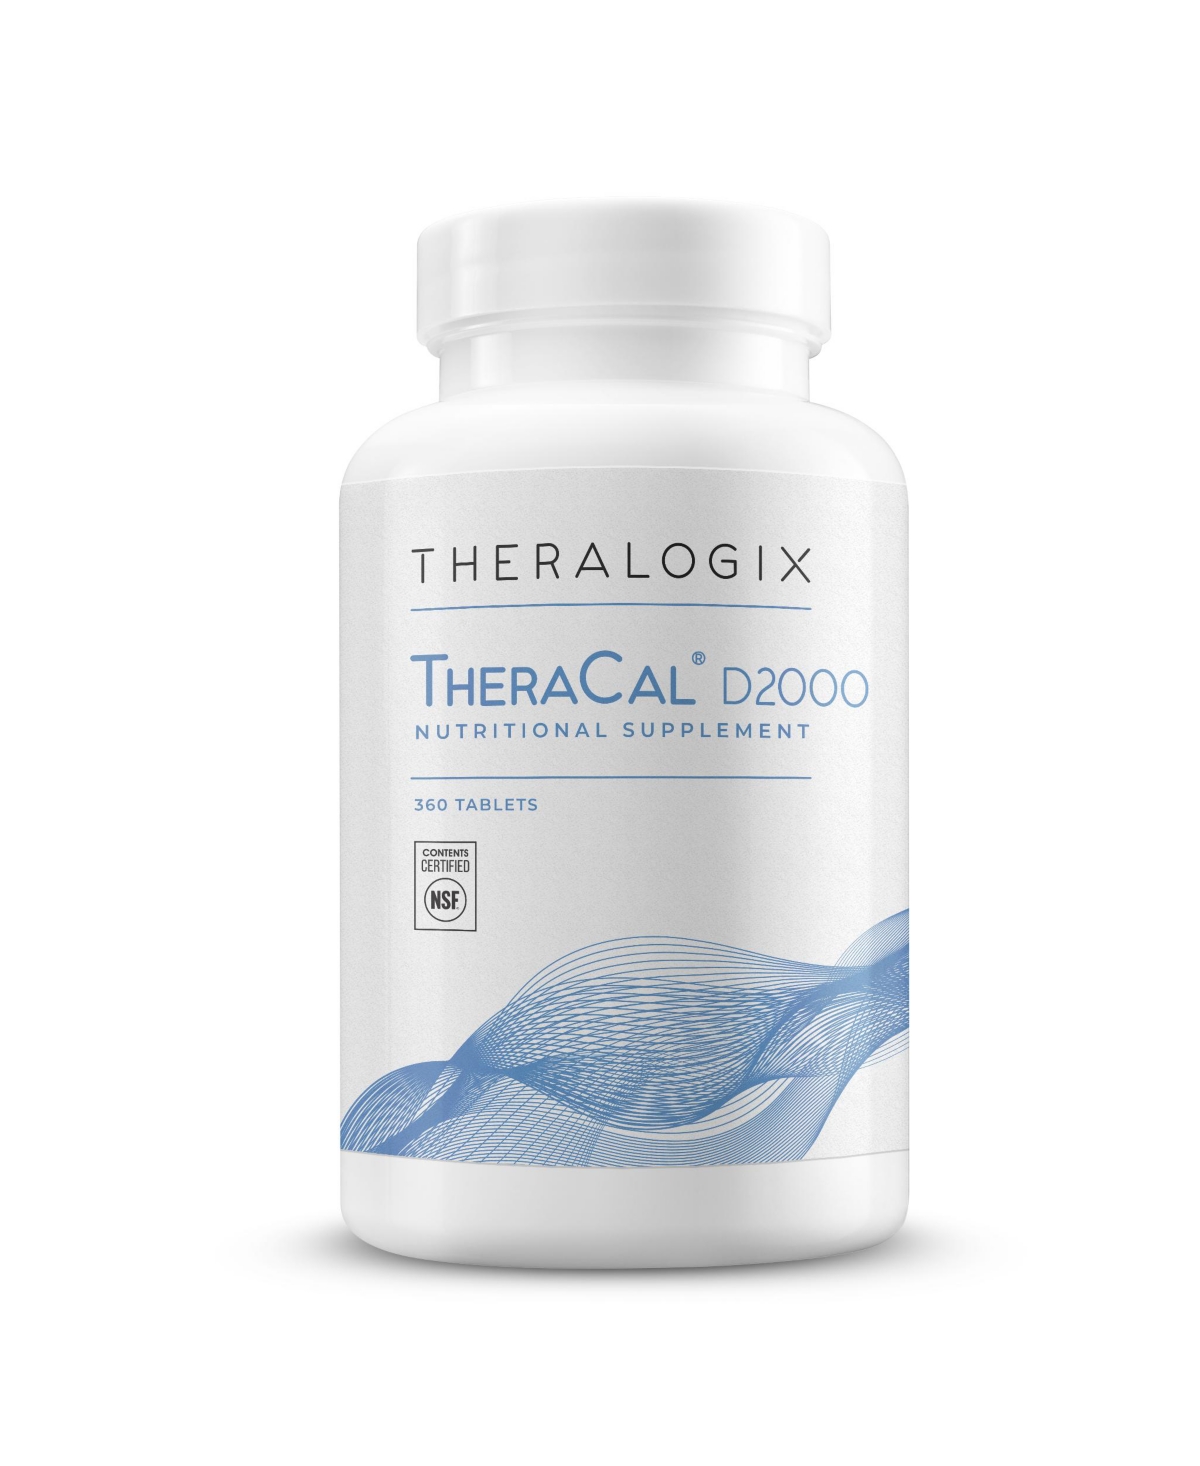 TheraCal D2000 Bone Health Supplement with Calcium, Vitamins D3 & K2, Magnesium - Open Miscellaneous